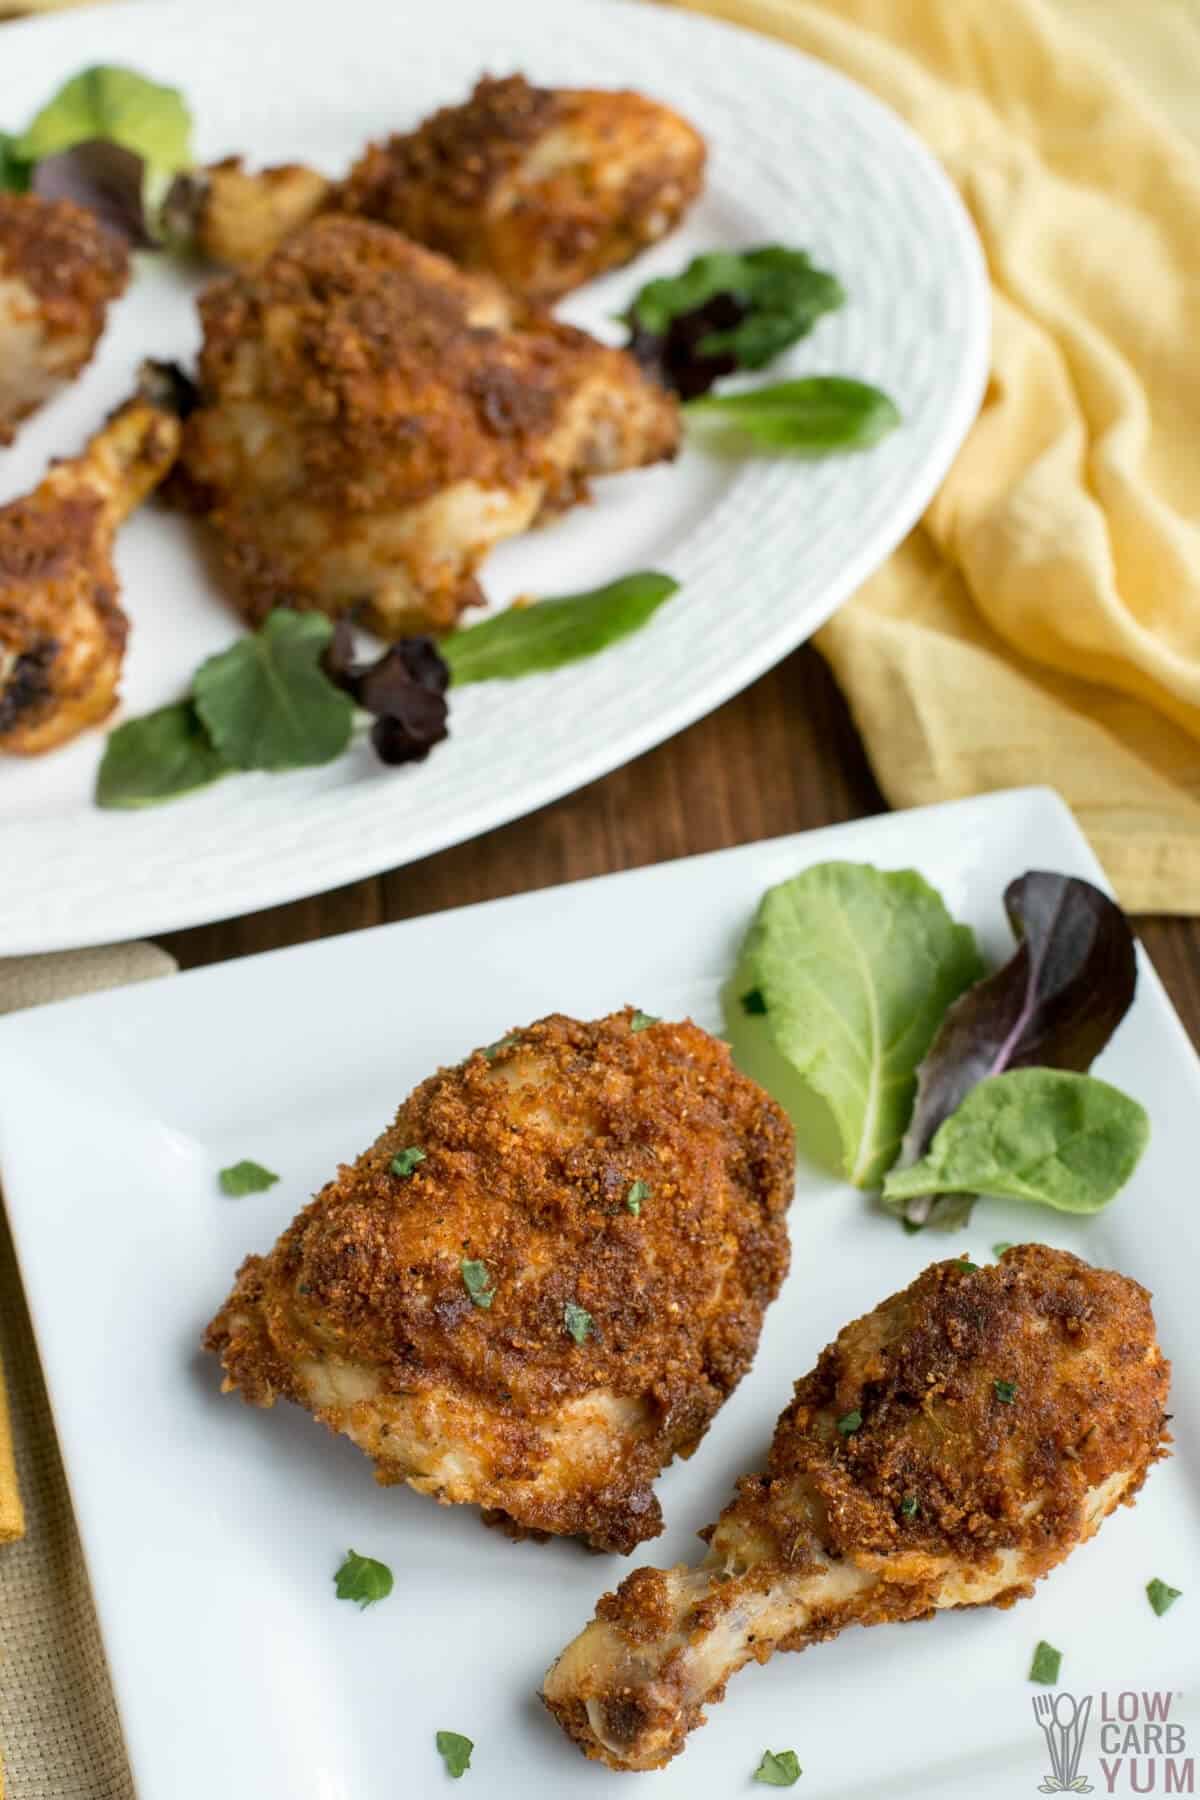 keto fried chicken made in air fryer or oven with pork rind coating